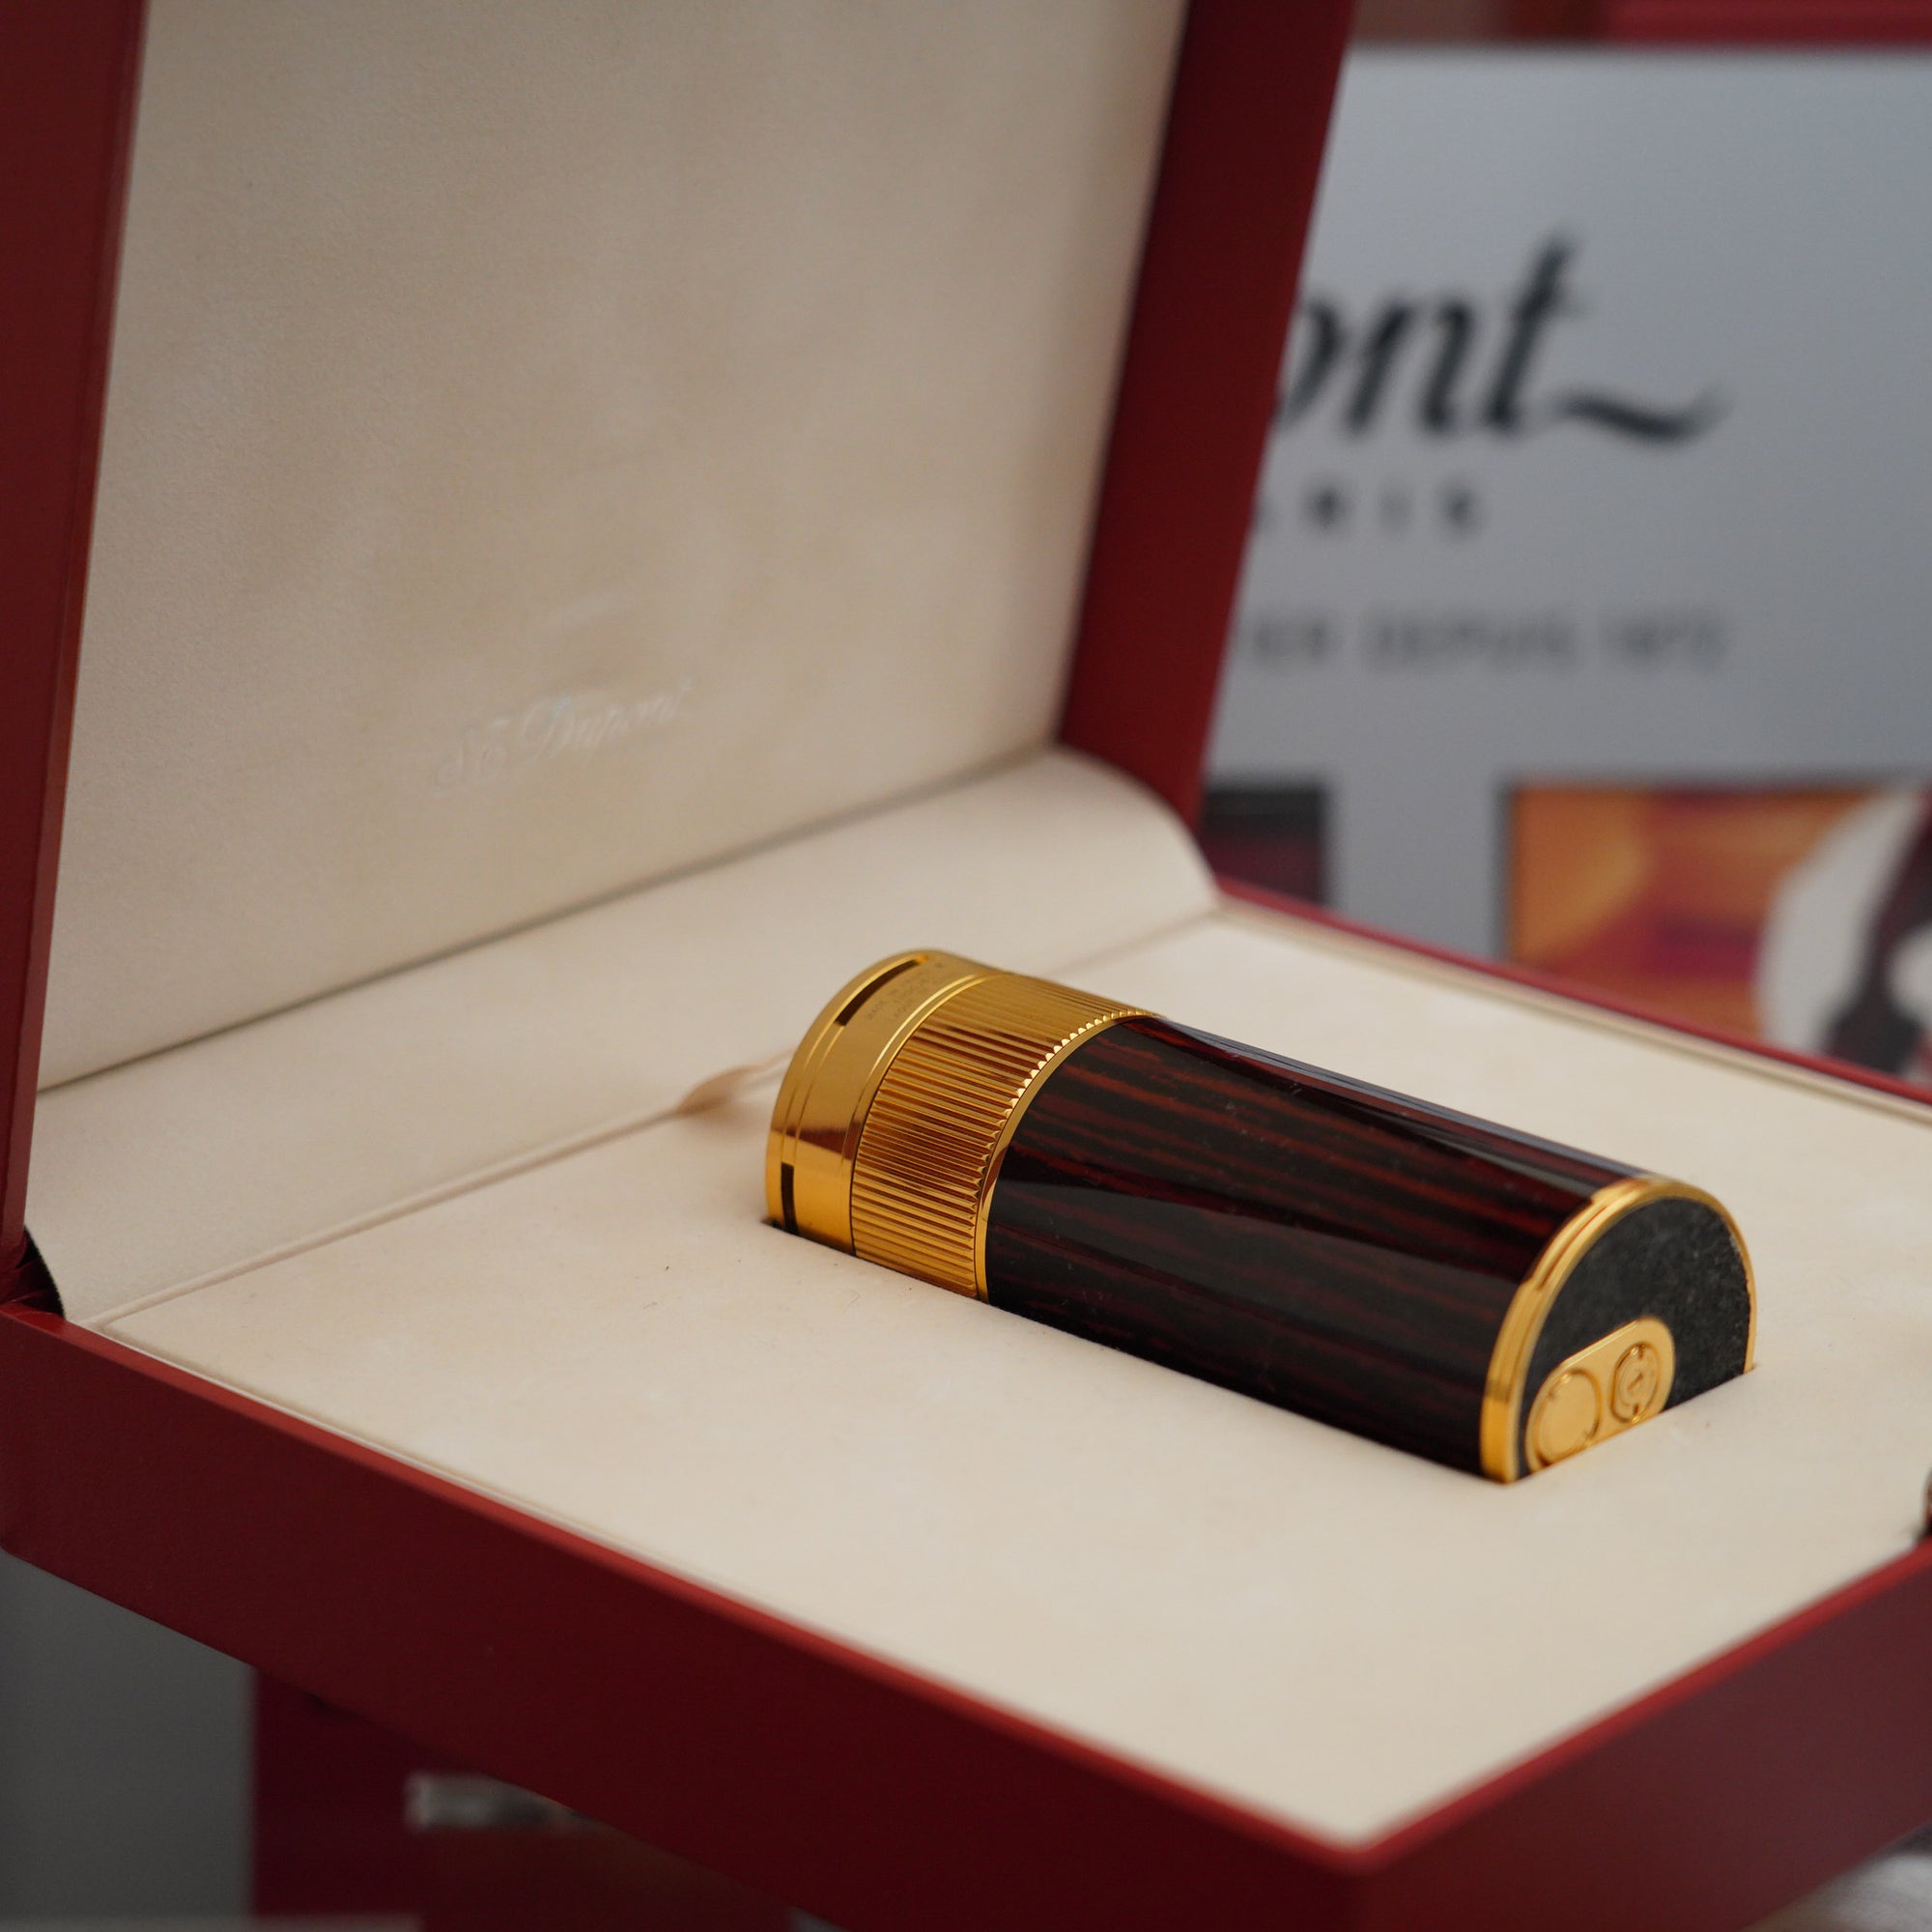 A Vintage 1980 S.T. Dupont 18k Masterpiece Unique Cylinder Gold Plated Macassar Lacquer Dual Flame Table Lighter is sitting in a box.